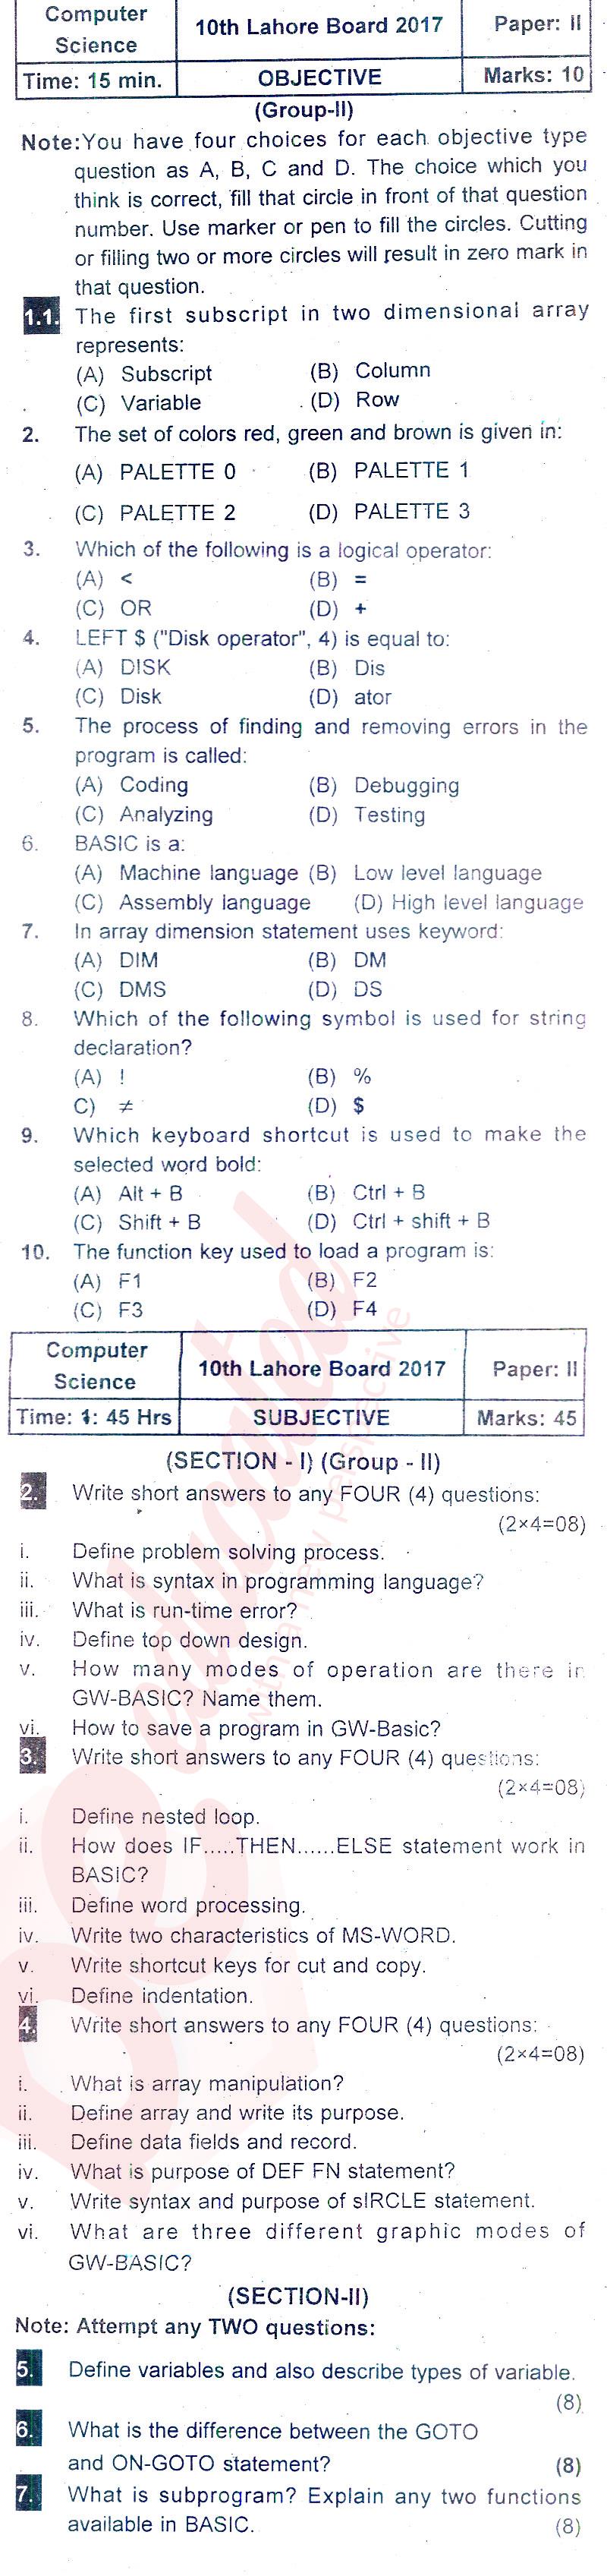 Computer Science 10th class Past Paper Group 2 BISE Lahore 2017